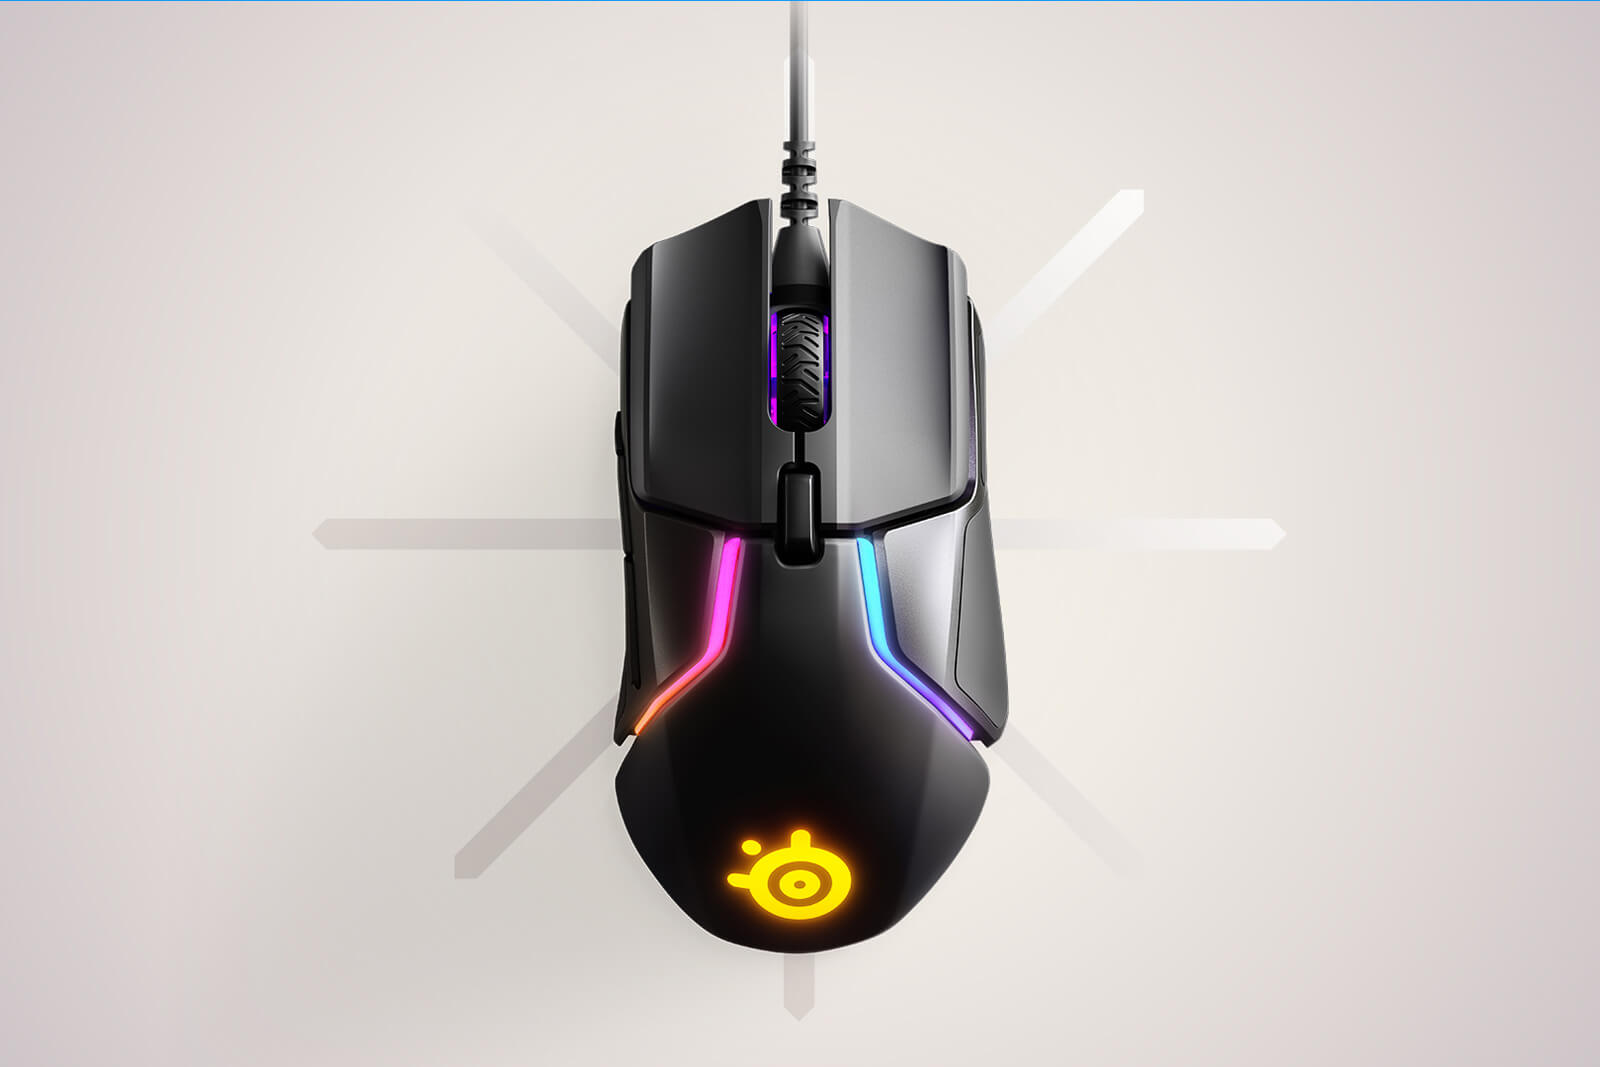 SteelSeries' Rival 600 mouse features dual optical sensors for high precision gaming